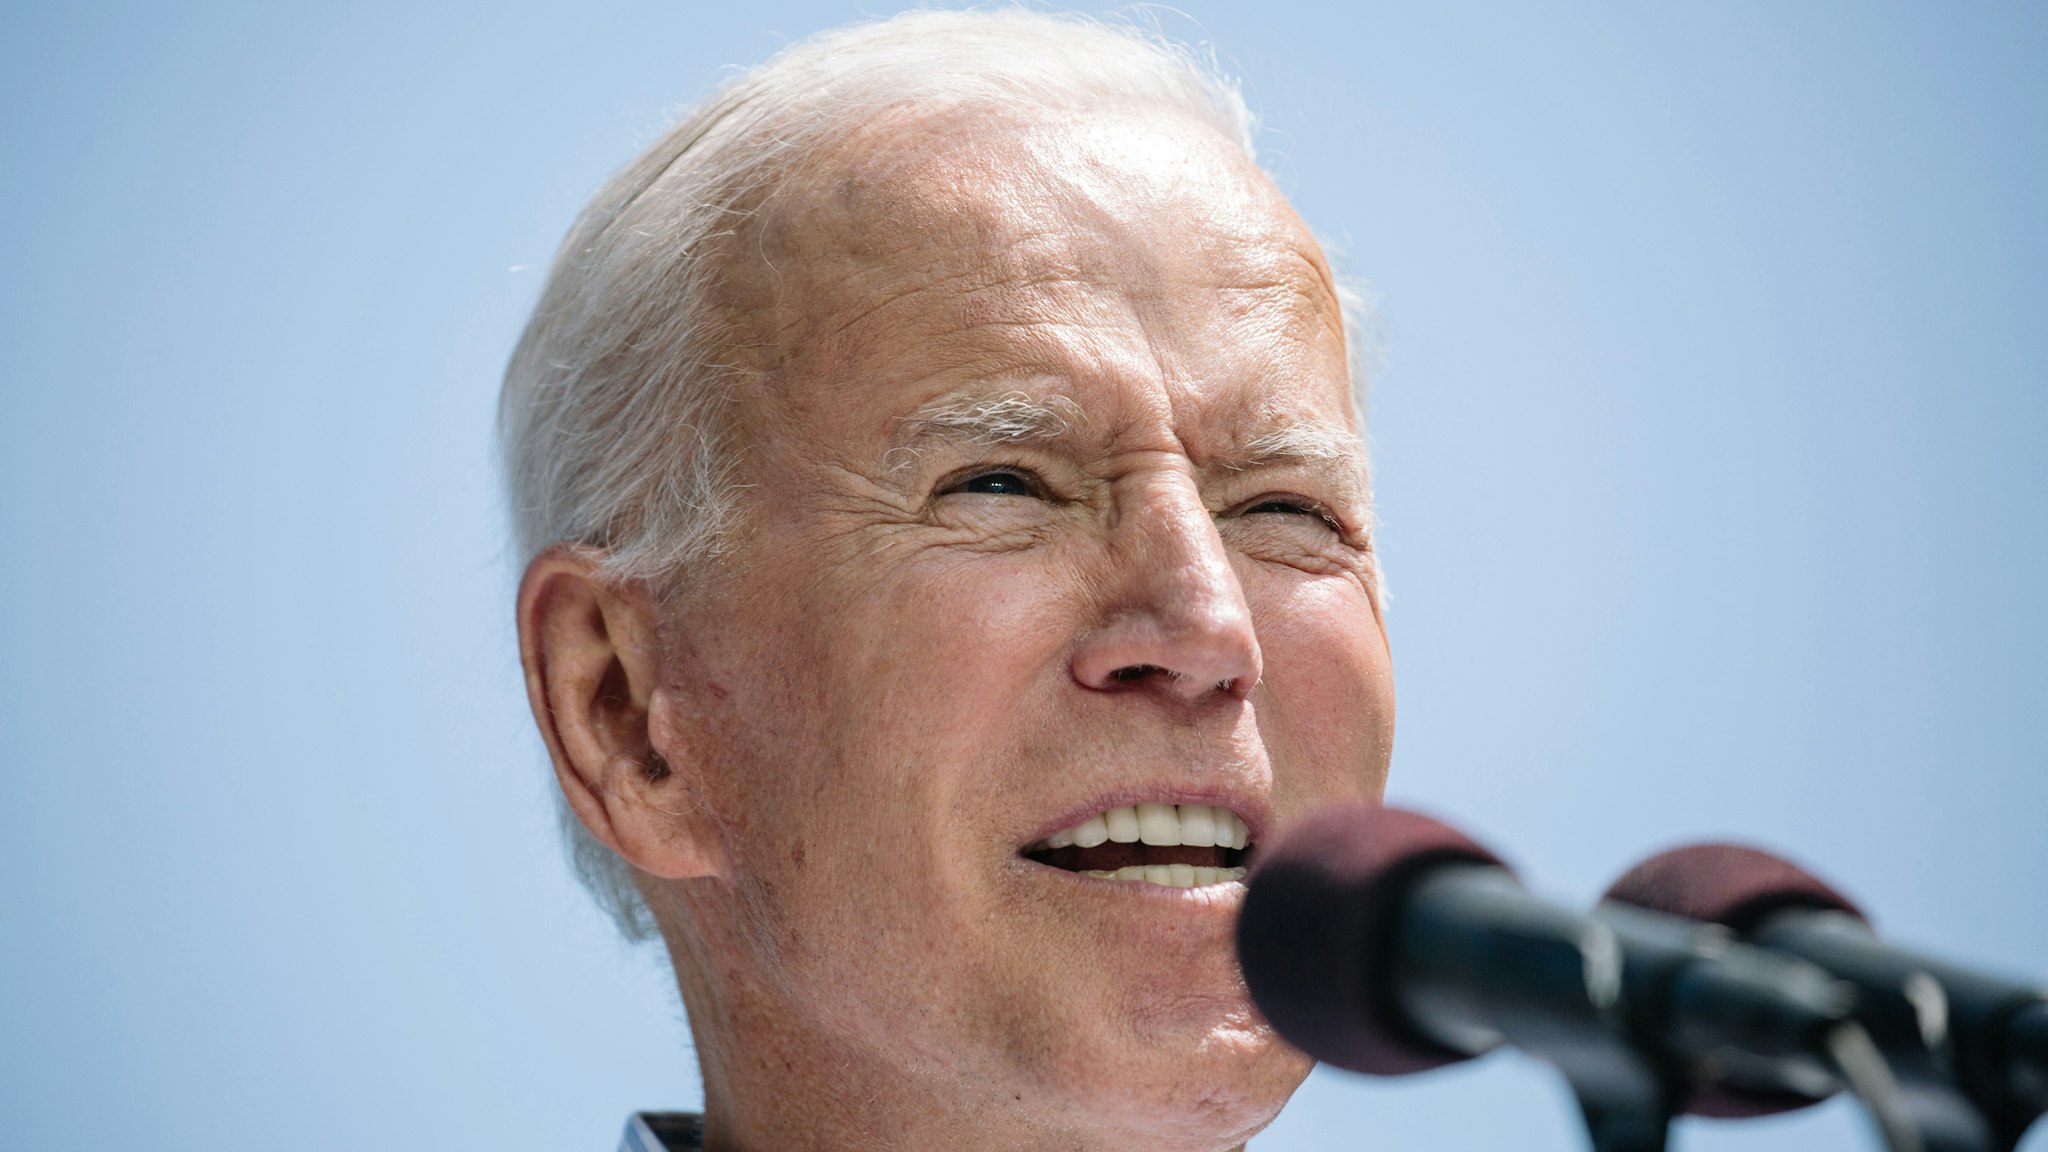 Former U.S. Vice President Joe Biden, 2020 Democratic presidential candidate, speaks during a campaign rally in Philadelphia, Pennsylvania, U.S., on Saturday, May 18, 2019. Biden told voters that he would lead the country "to stop fighting and start fixing" if elected president, striking a contrast with the current occupant of the White House and with many of the other Democrats hoping to win their party's nomination.